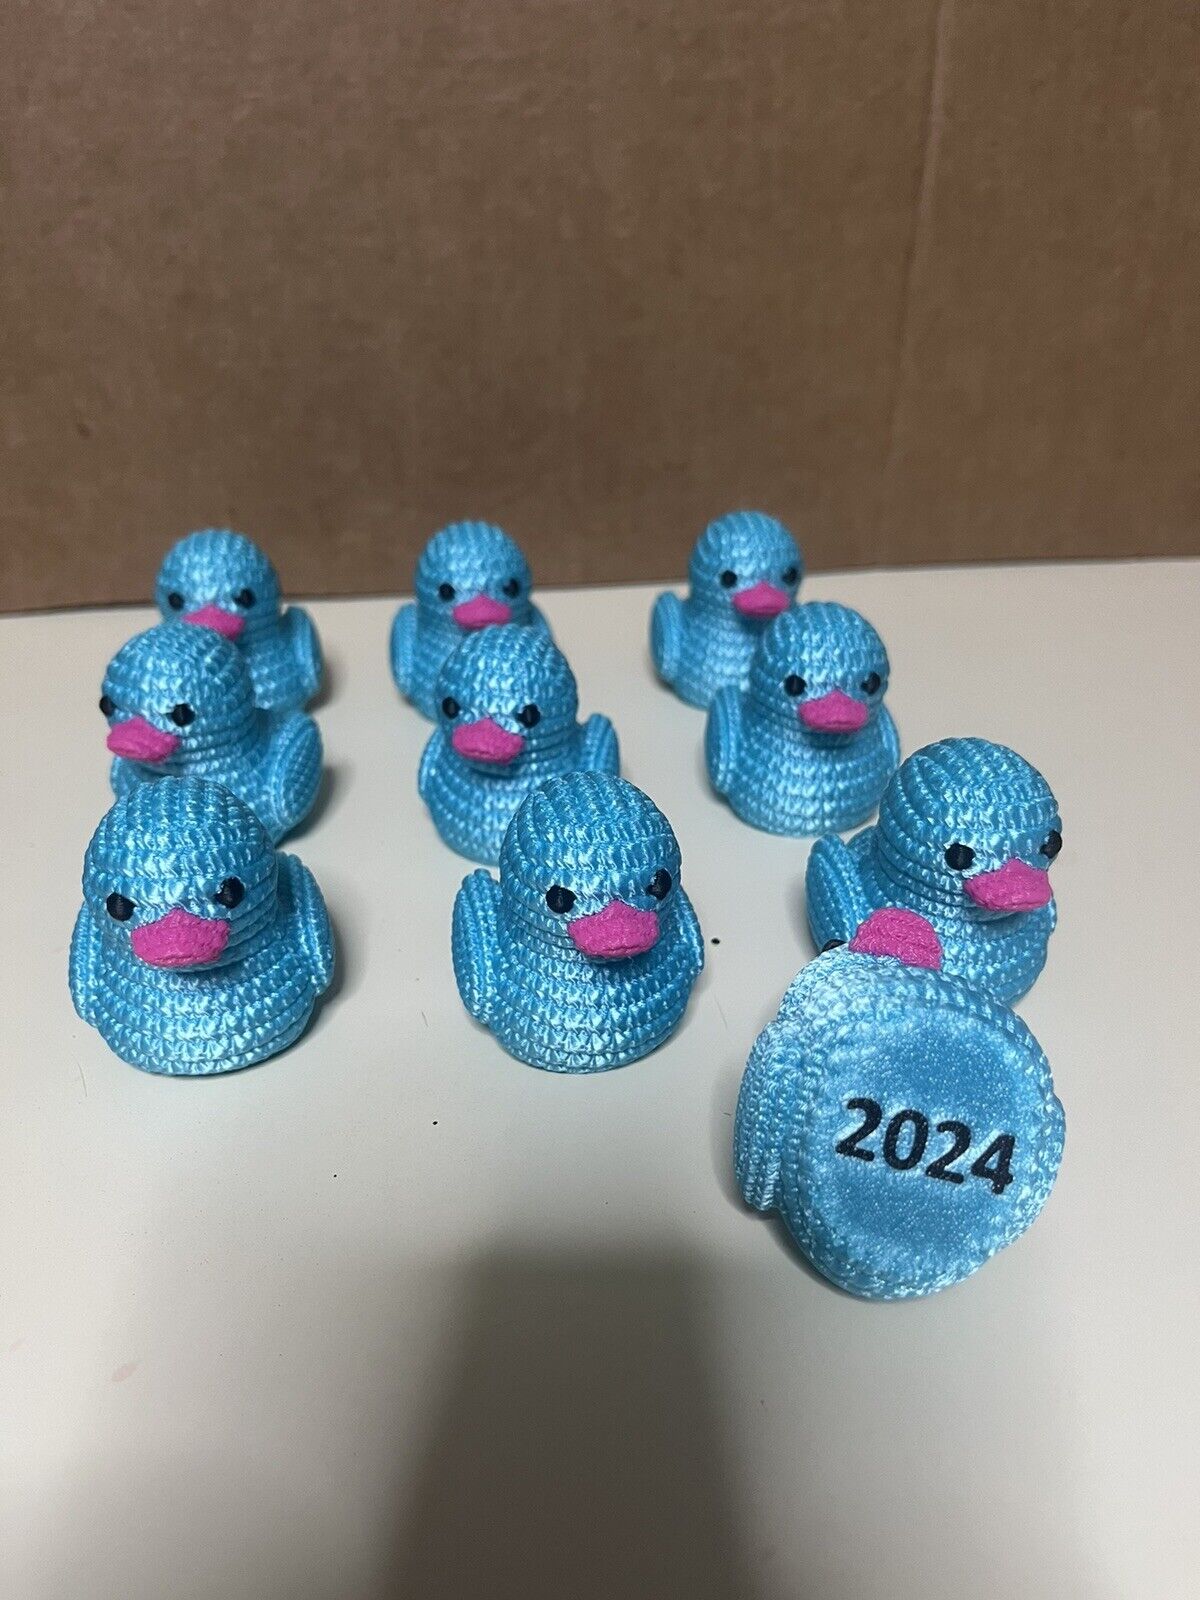 10 PCS Jeep 3d Printed Ducks, for Ducking And Cruise Ship. Knitted Finish.